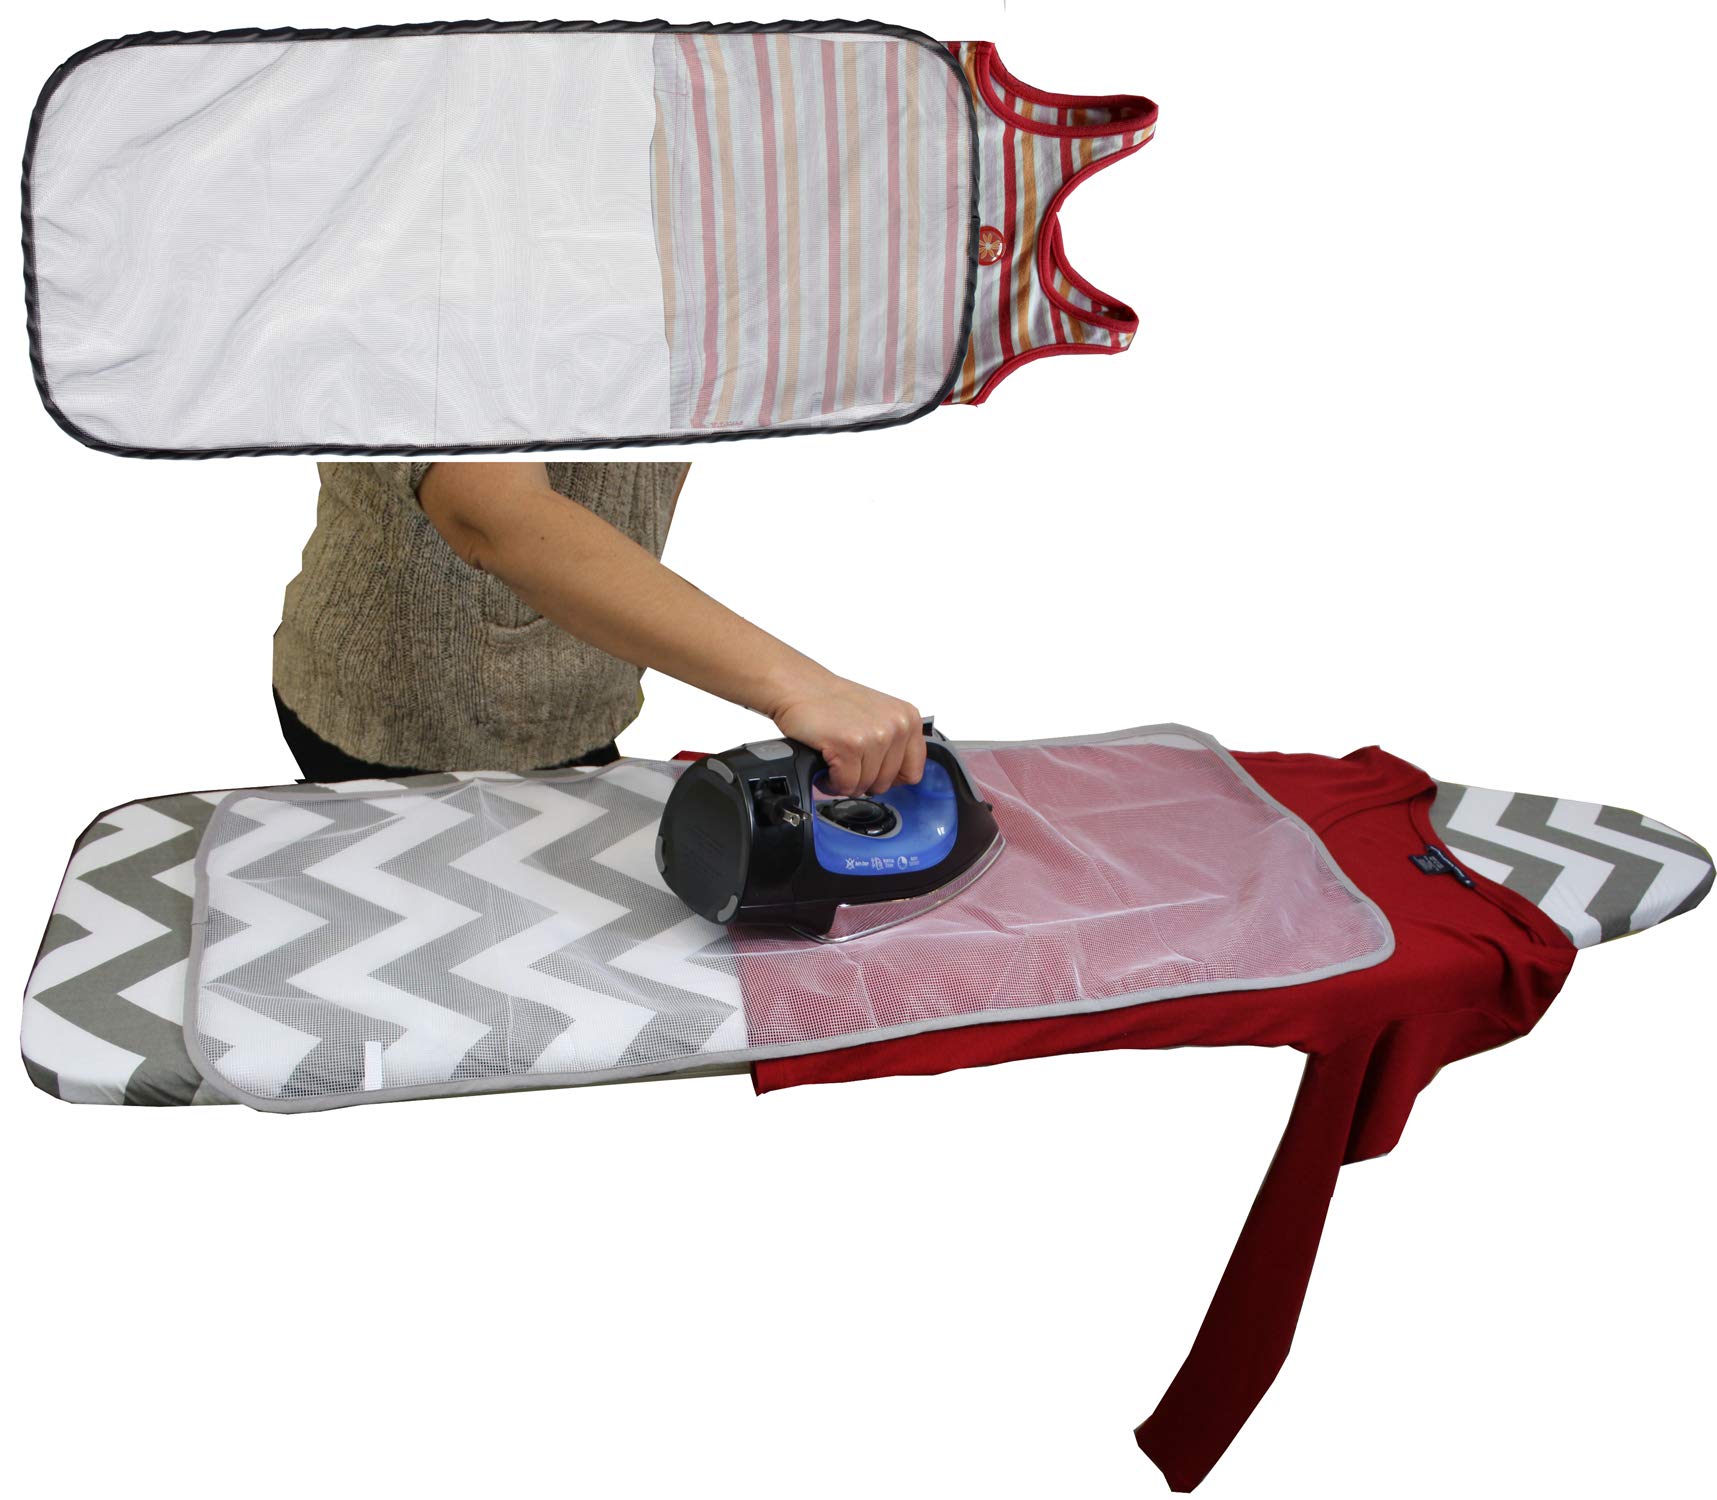 Balffor Balffor Ironing Board Cover And Pad Standard Size Silicone Coated - Scorch Proof Trifusion Iron Board Cover With Bonus Adjustable Fasteners And Protective Mesh (White And Grey, 15" X 54") Hom - image 5 of 7